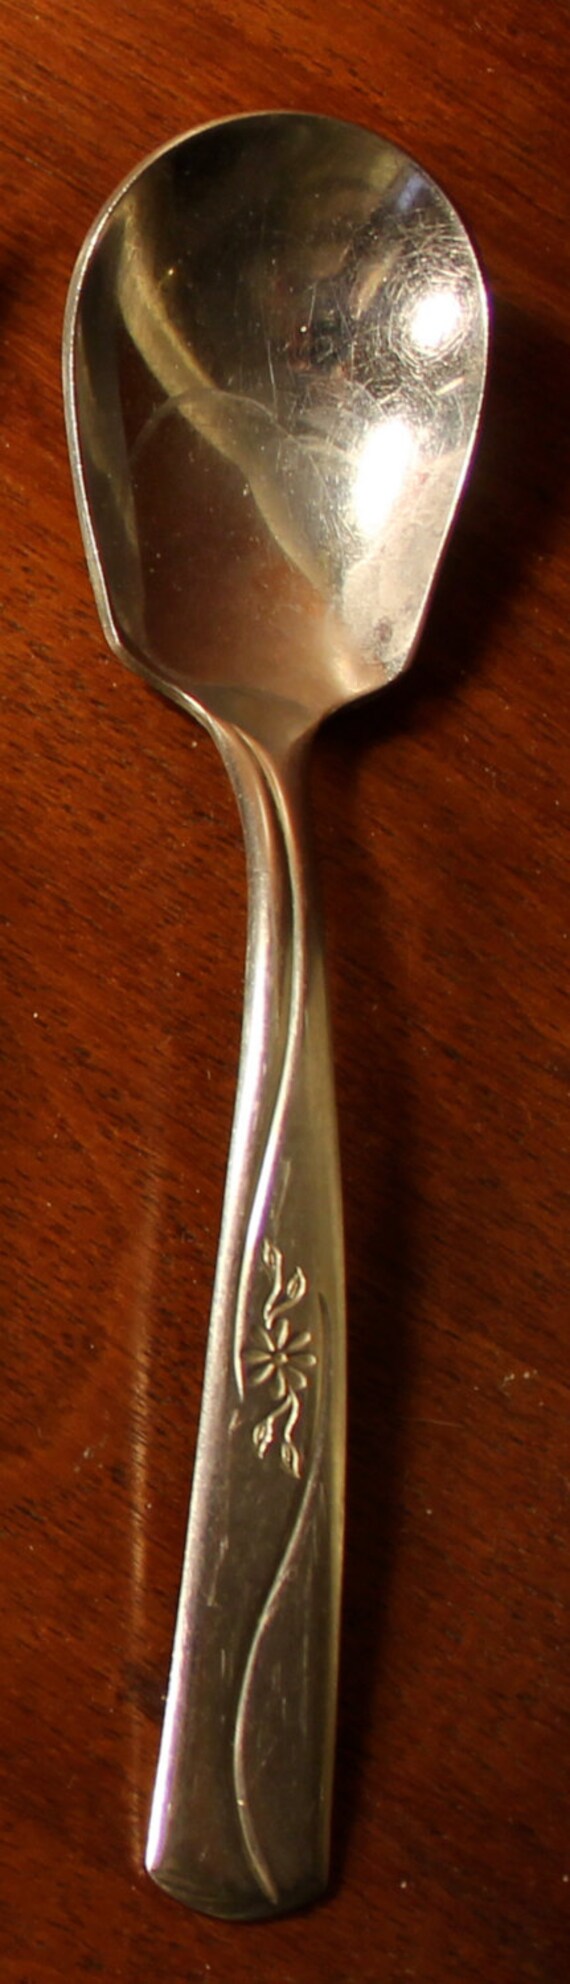 IMPERIAL Stainless Flatware IMI41 starburst Star by AtomicHoliday